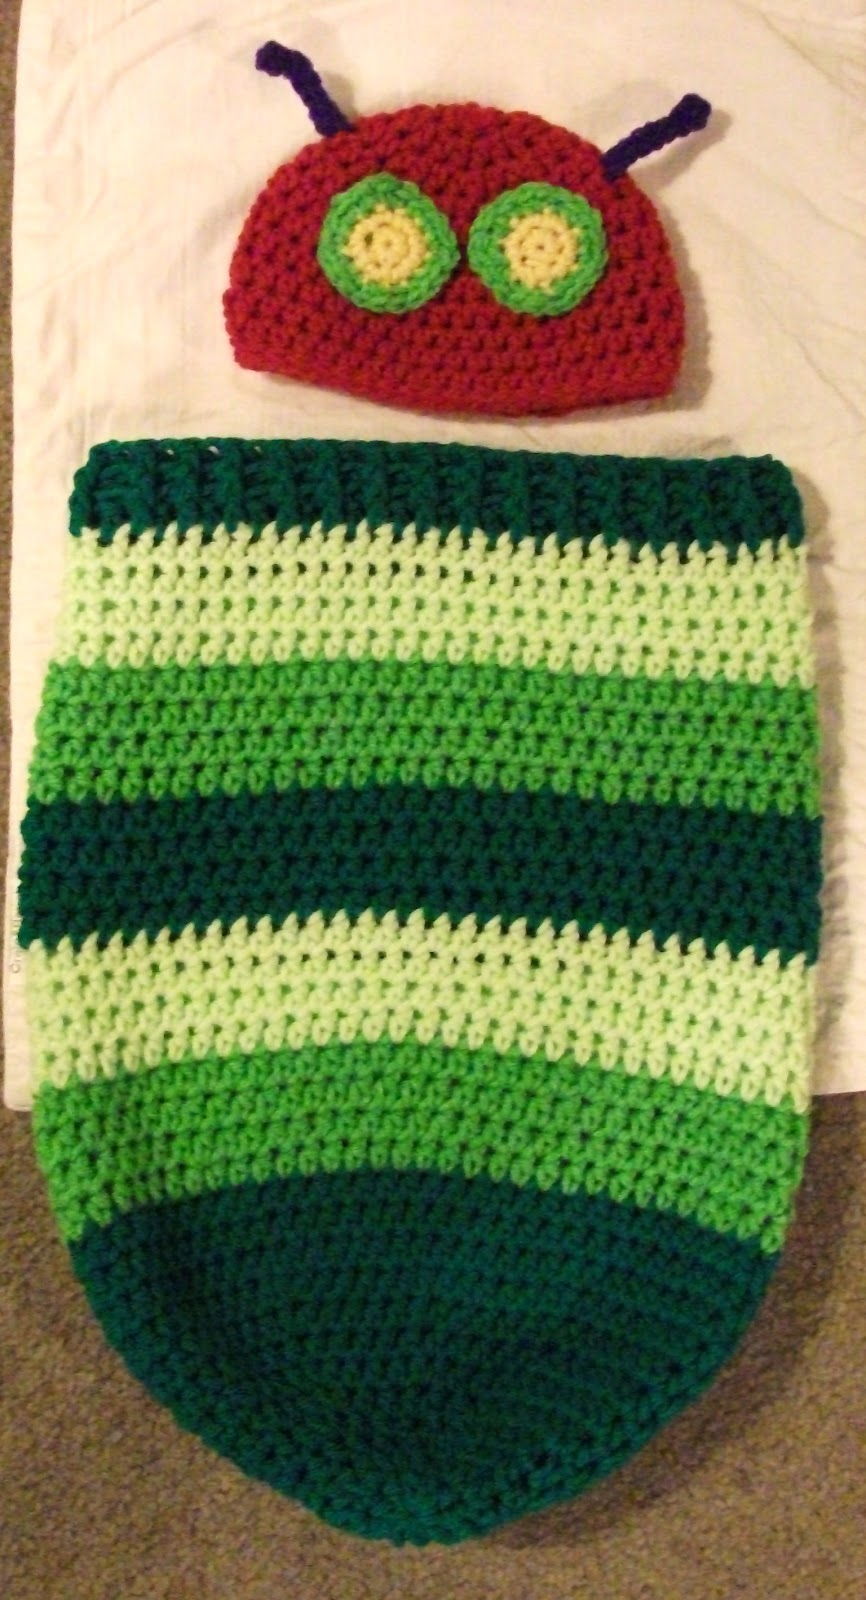 35+ Adorable Crochet and Knitted Baby Cocoon Patterns --> The Very Hungry Caterpillar Crochet Baby Hat and Cocoon